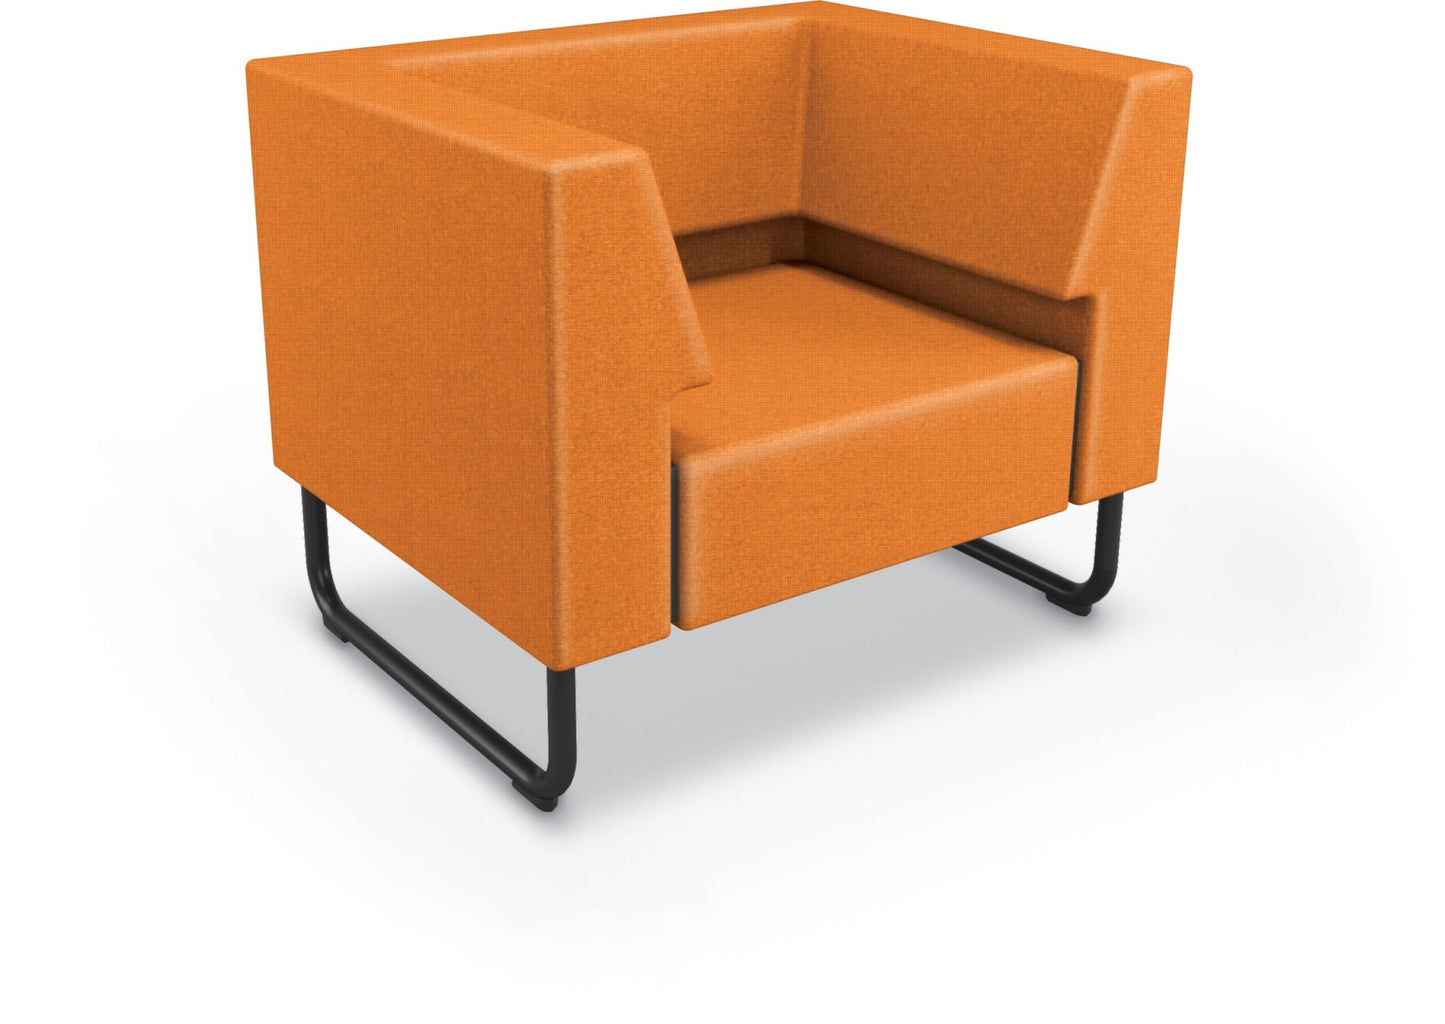 Mooreco Akt Soft Seating Lounge Chair - Both Arms - Grade 02 Fabric and Powder Coated Sled Legs - SchoolOutlet